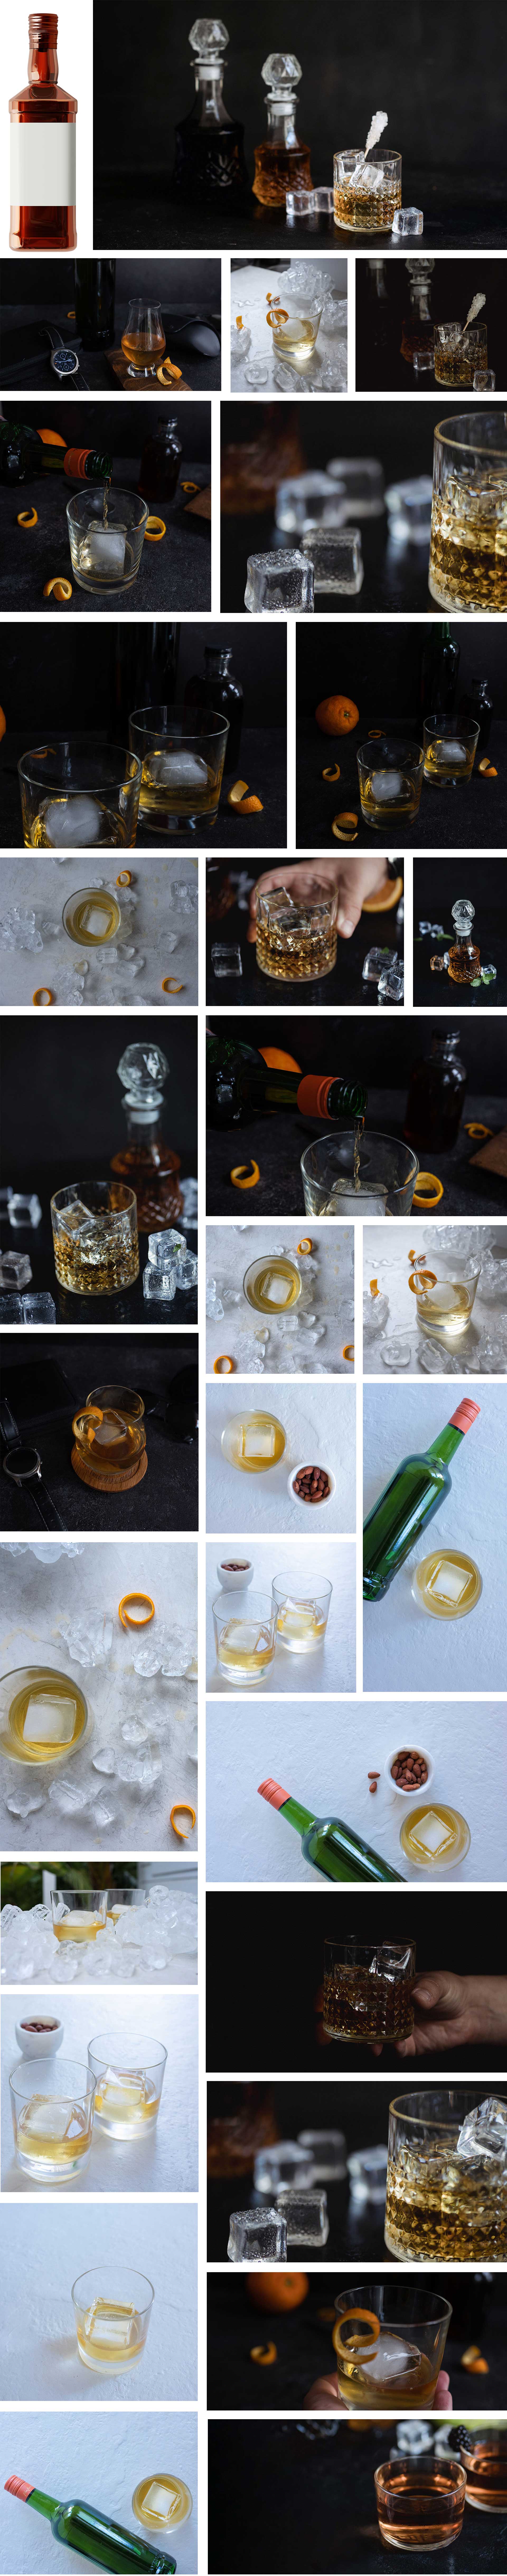 Whiskey-Distillery-image-collage Get a Free Whiskey Distillery Layout Pack for Divi